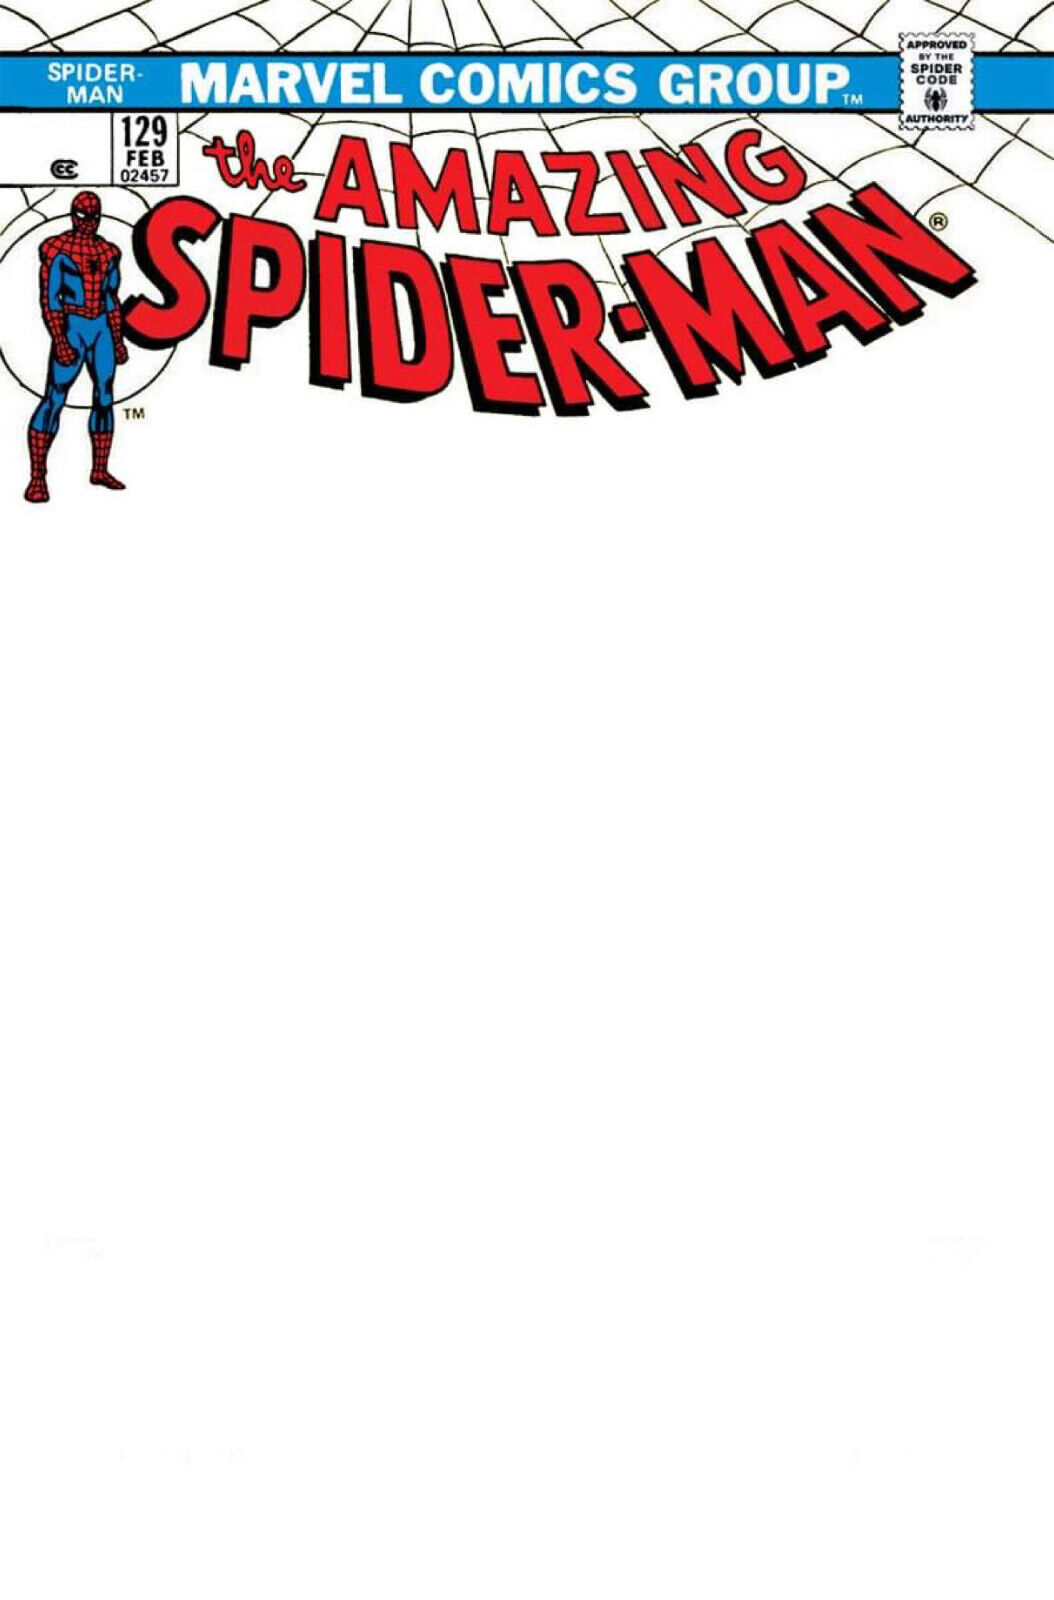 AMAZING SPIDER-MAN #129 FACSIMILE (BLANK/SKETCH EXCLUSIVE VARIANT)(1ST PUNISHER)